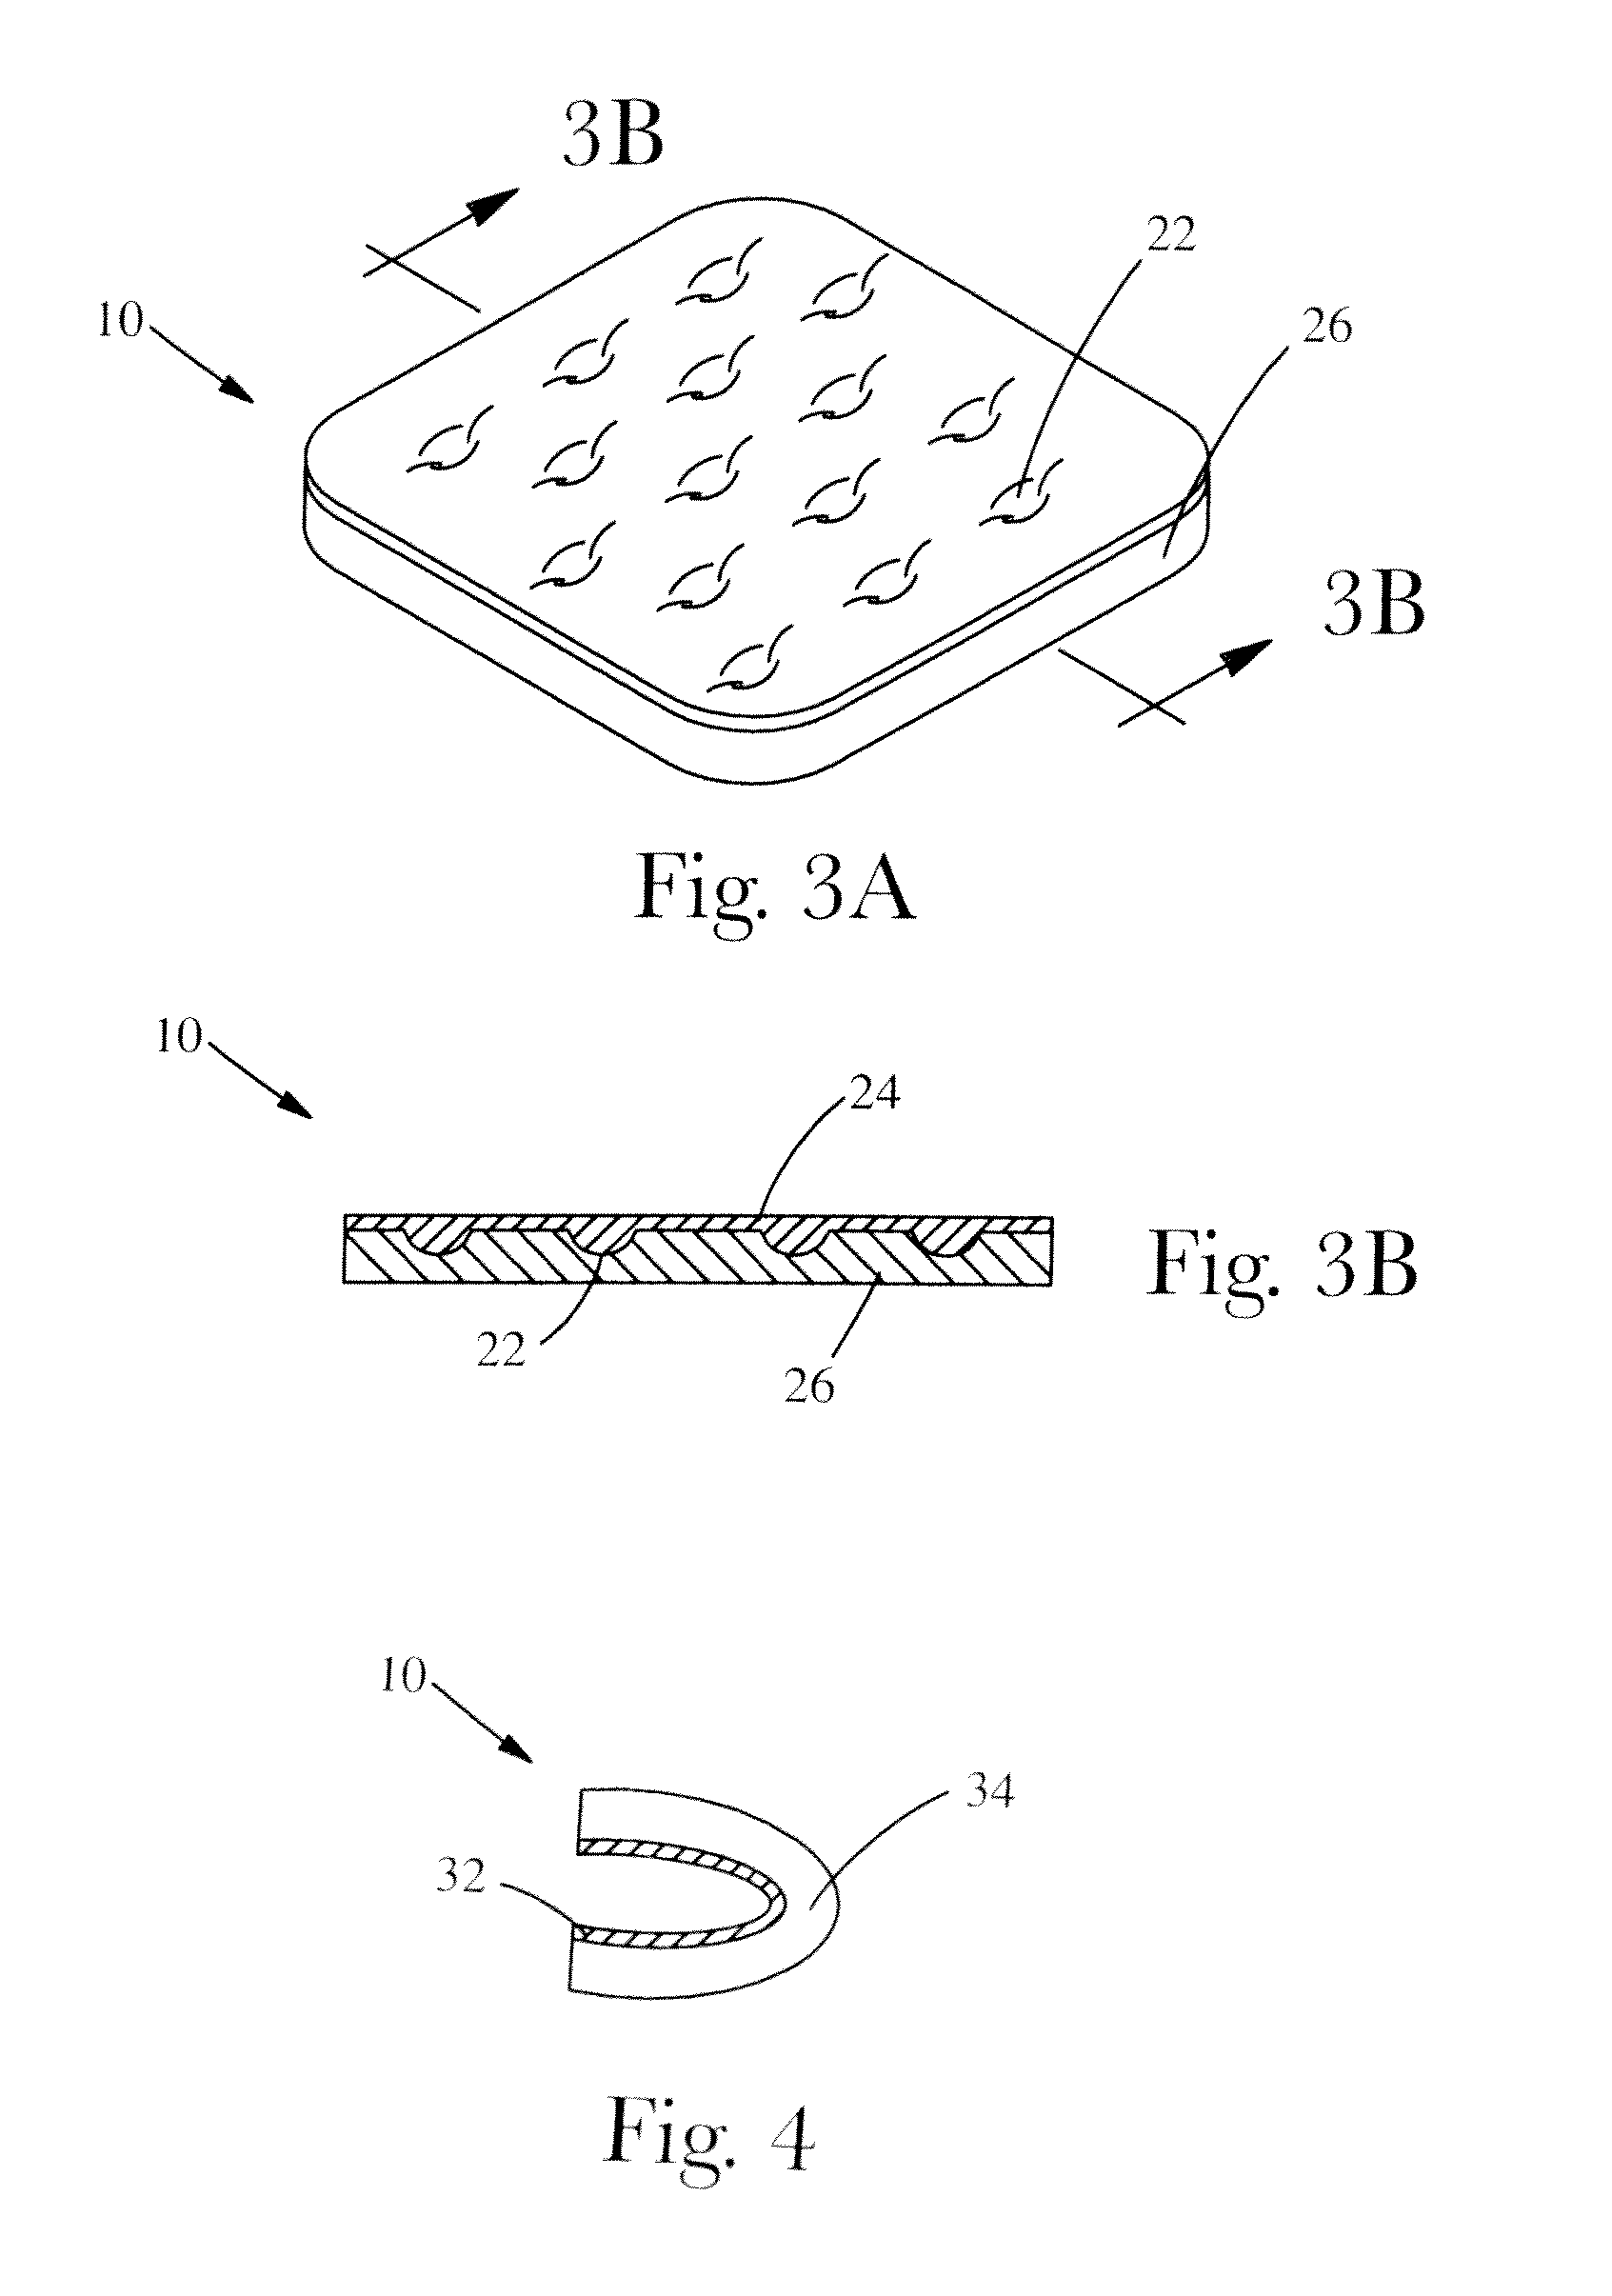 Porous, Dissolvable Solid Substrate and Surface Resident Coating Comprising Matrix Microspheres